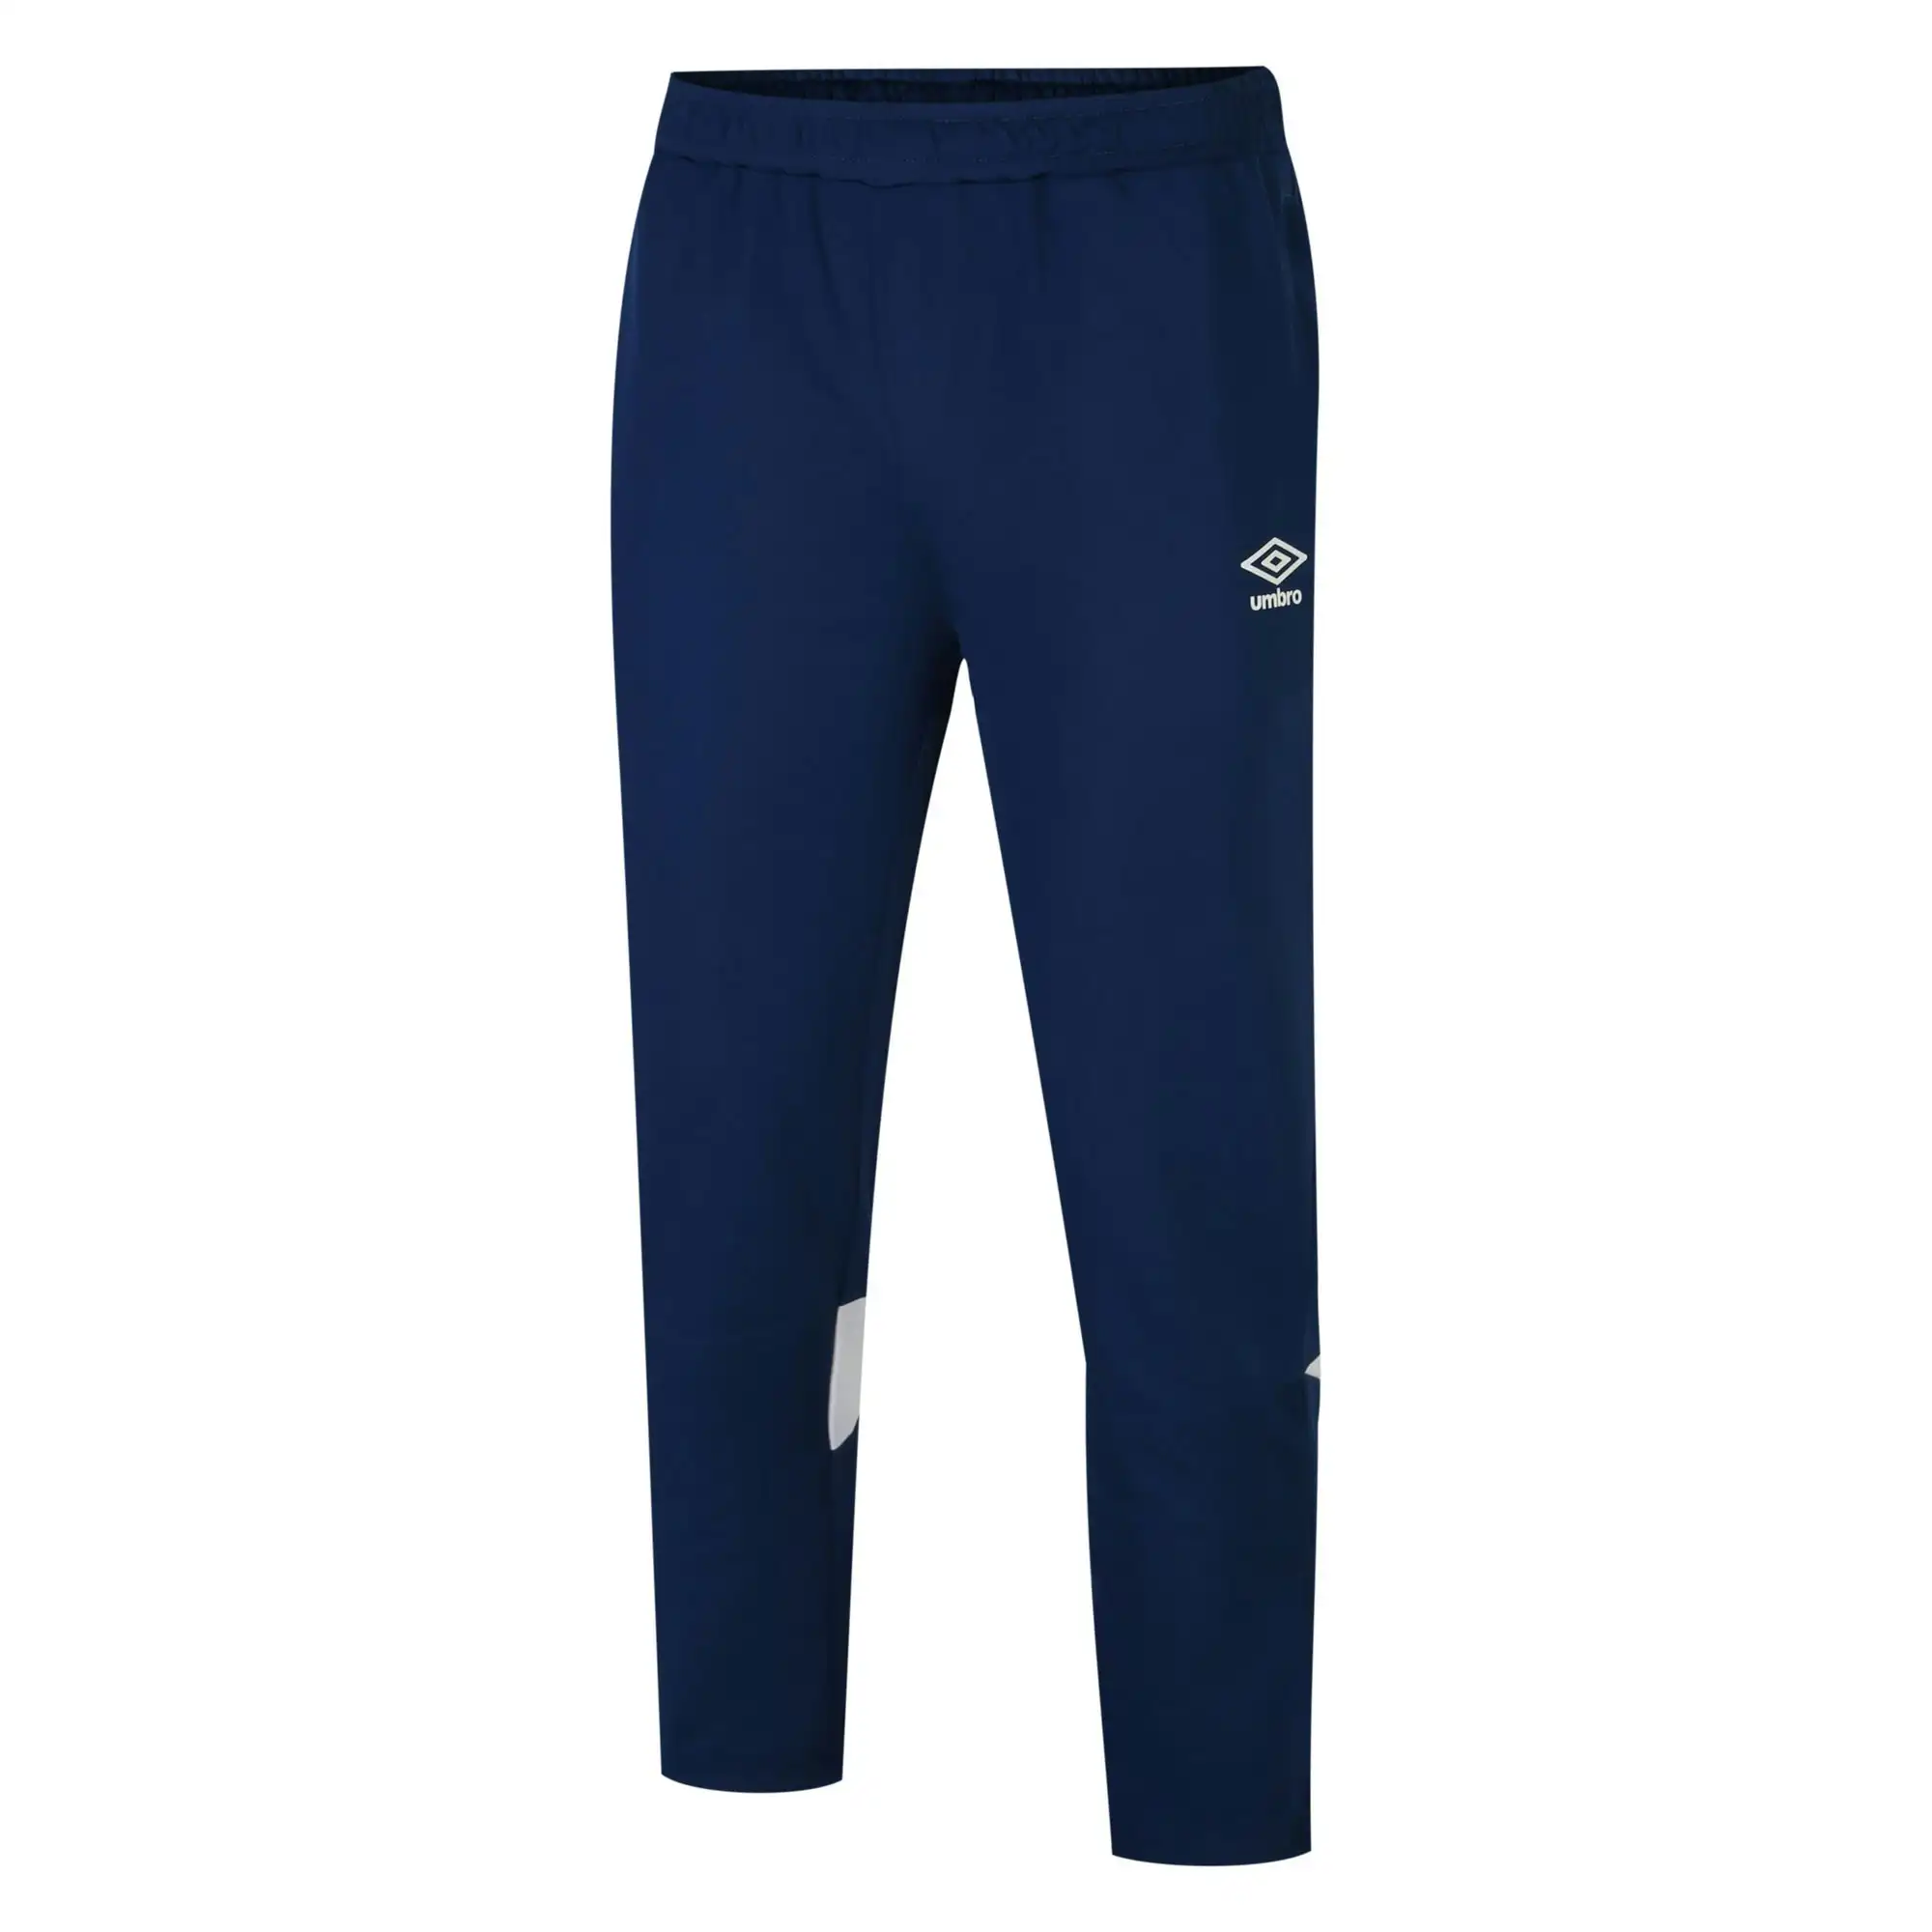 Umbro Mens Total Training Knitted Jogging Bottoms